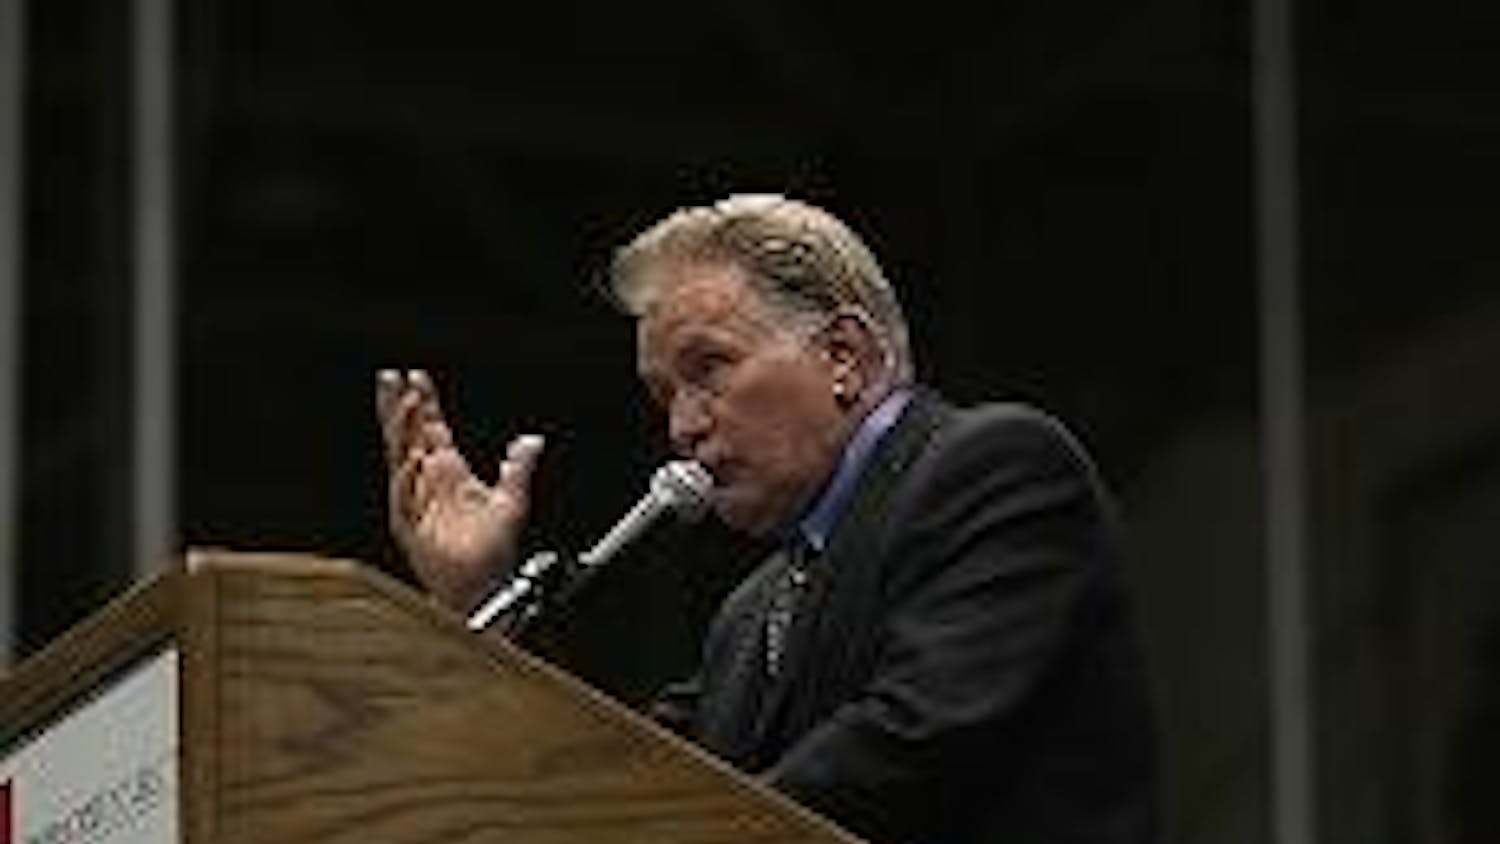 AU'S WEST WING- Martin Sheen, star of "The West Wing," discussed the importance of students getting involved in humanitarian causes in the world during his speech in Bender Arena Monday.